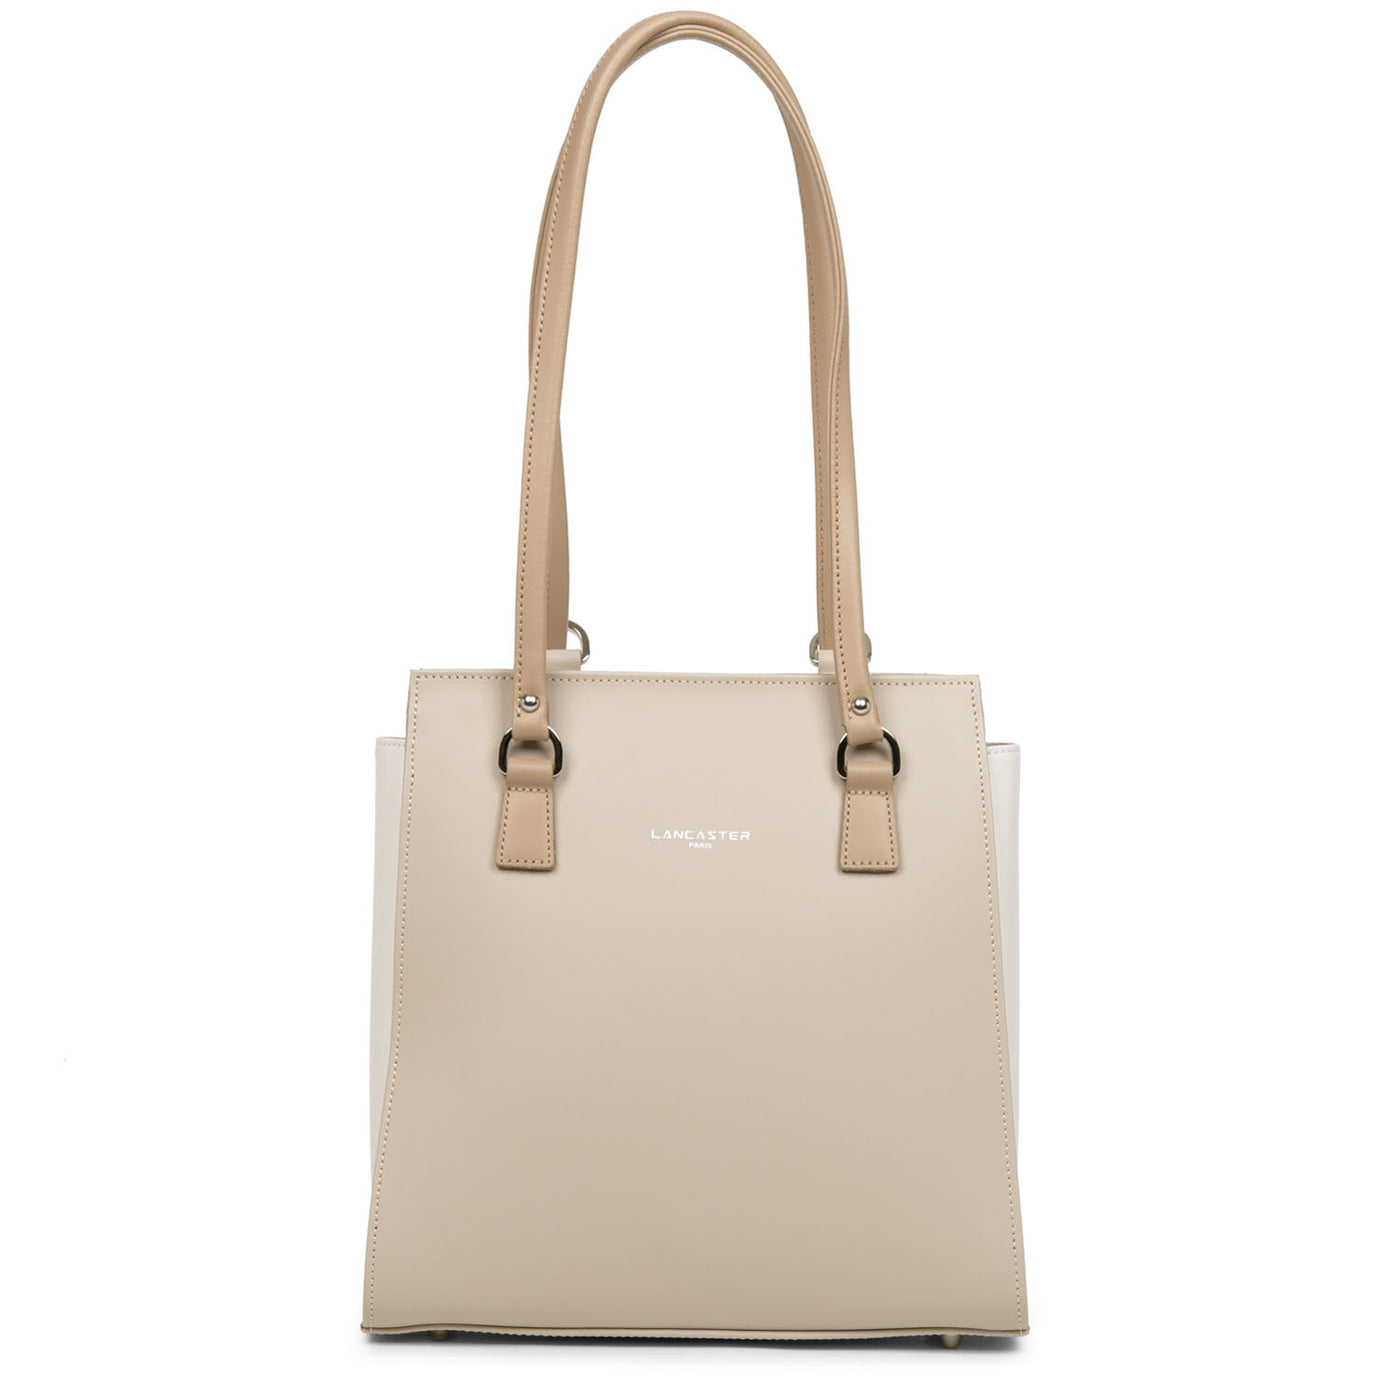 sac à dos multi-fonction - smooth #couleur_galet-ros-cru-nude